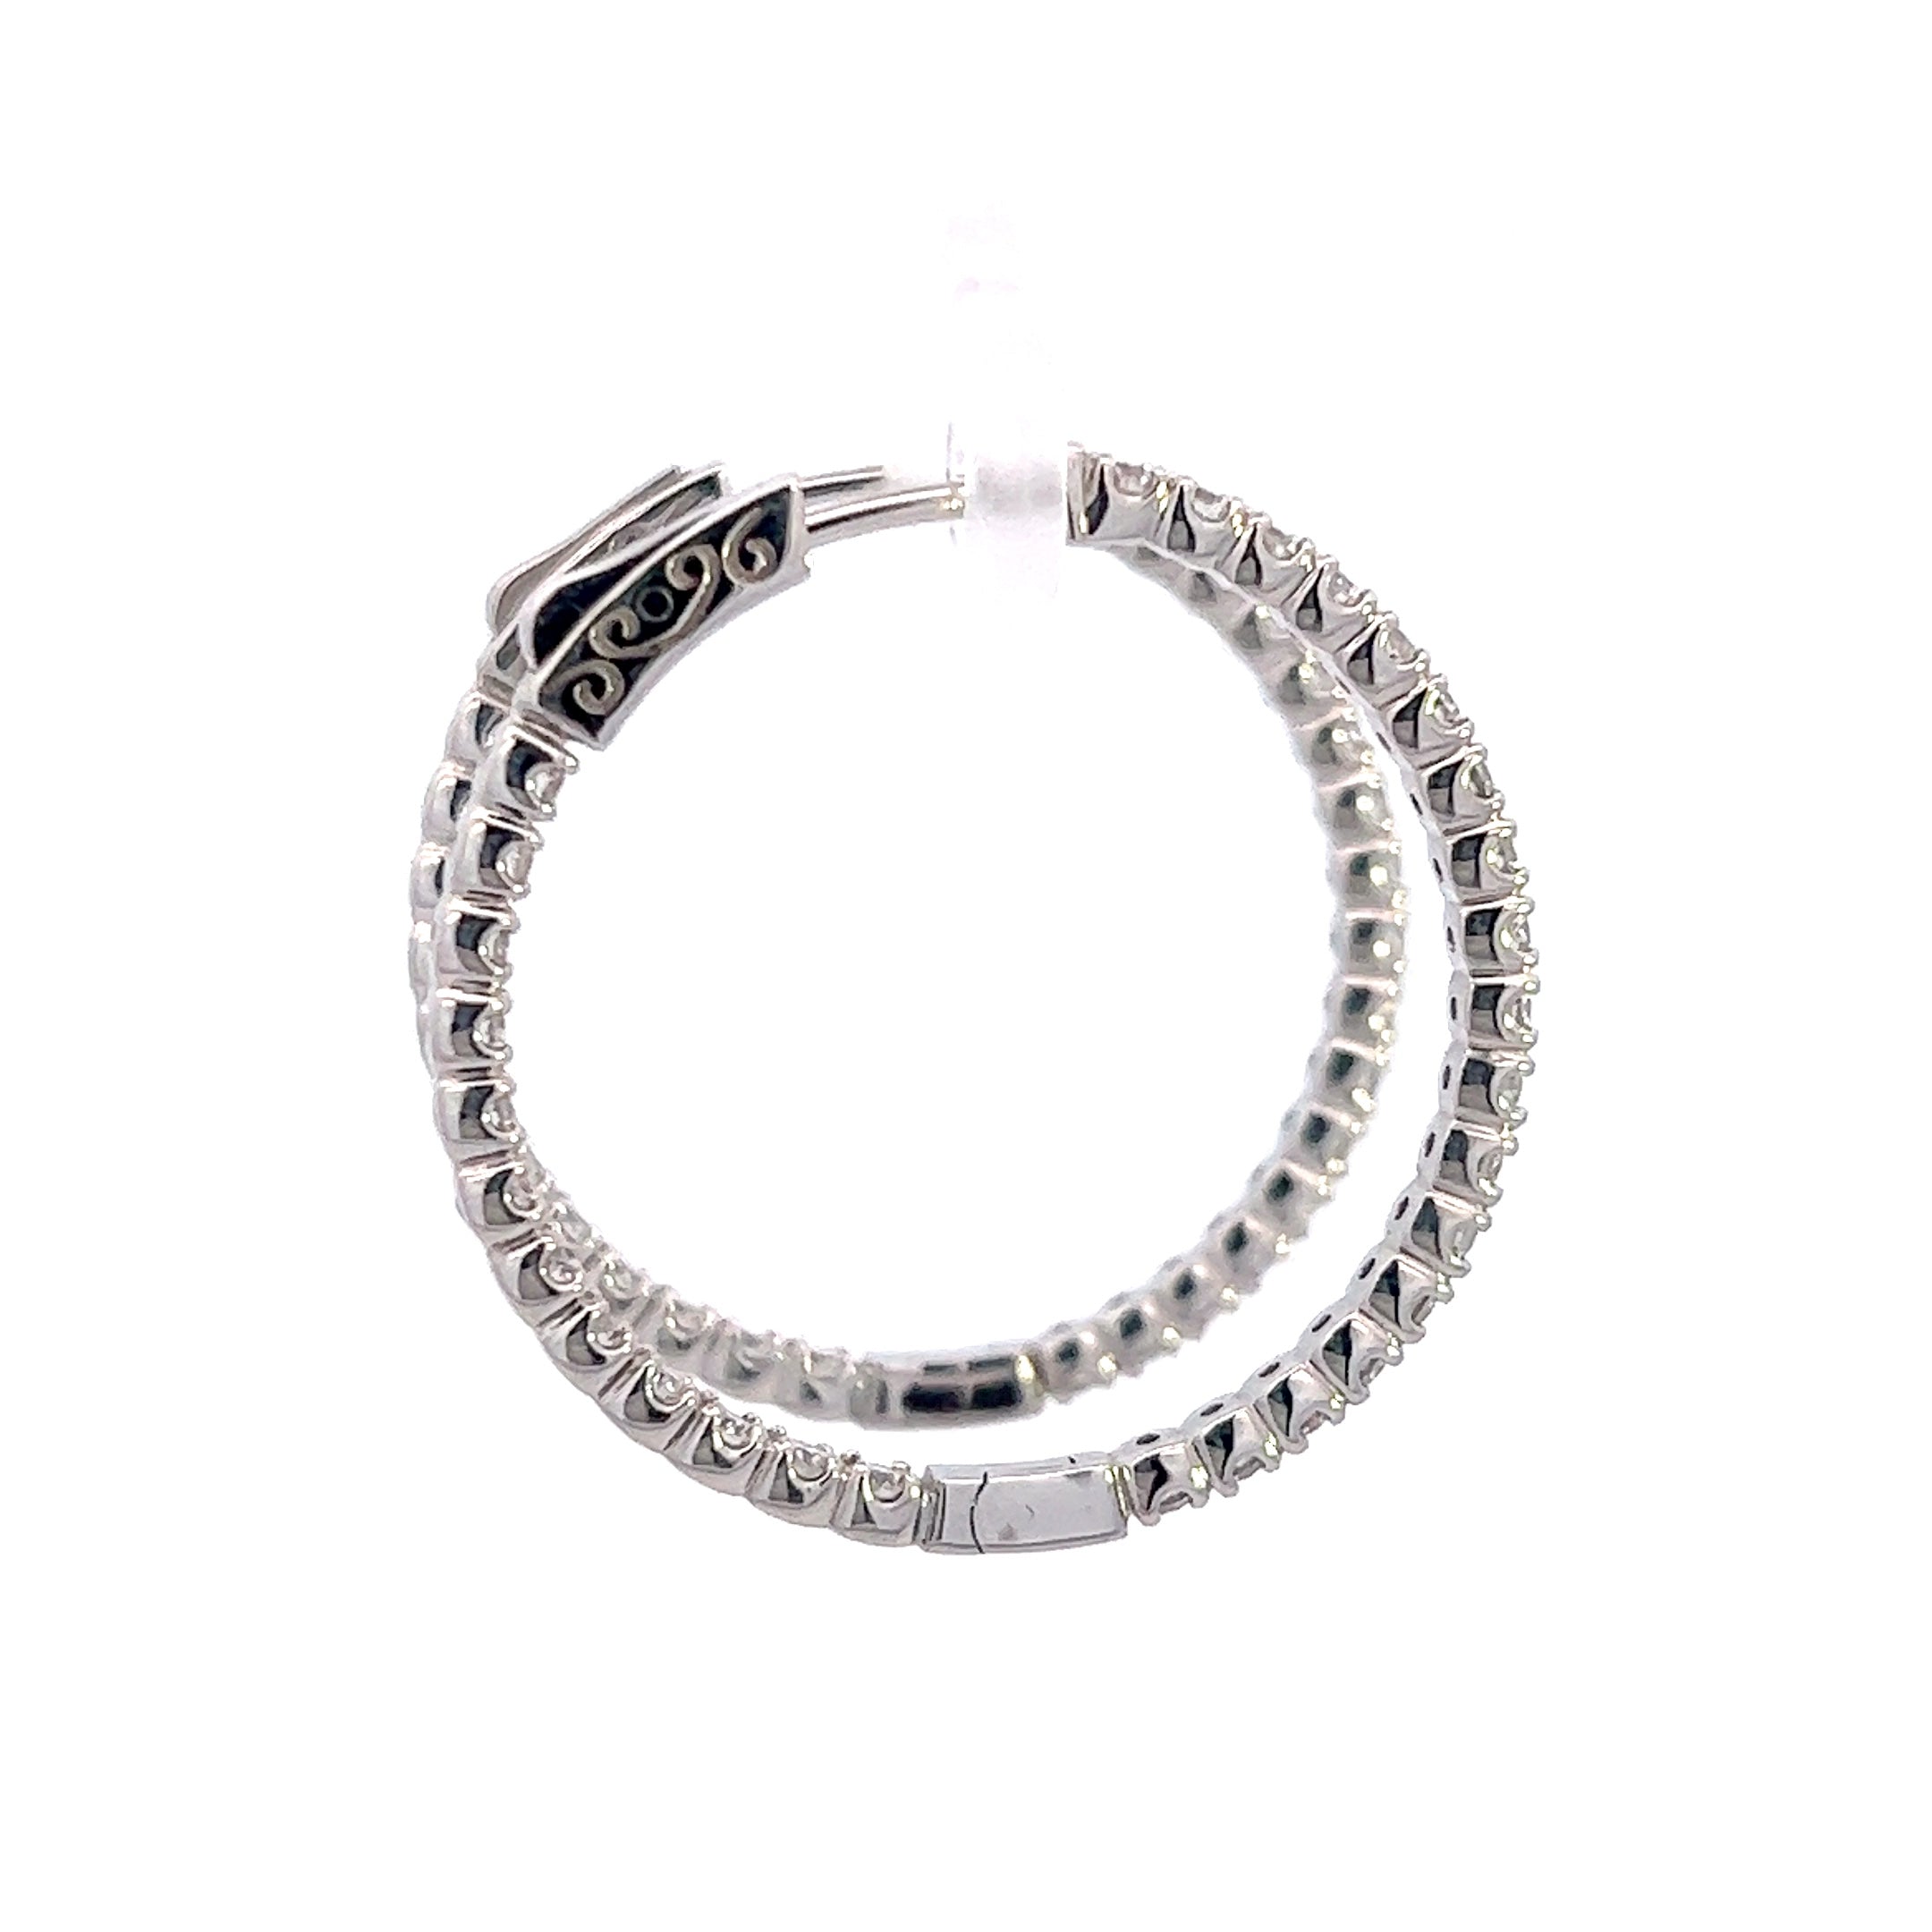 1.12ct Round Cut Natural Diamond White Gold Hoop Earrings